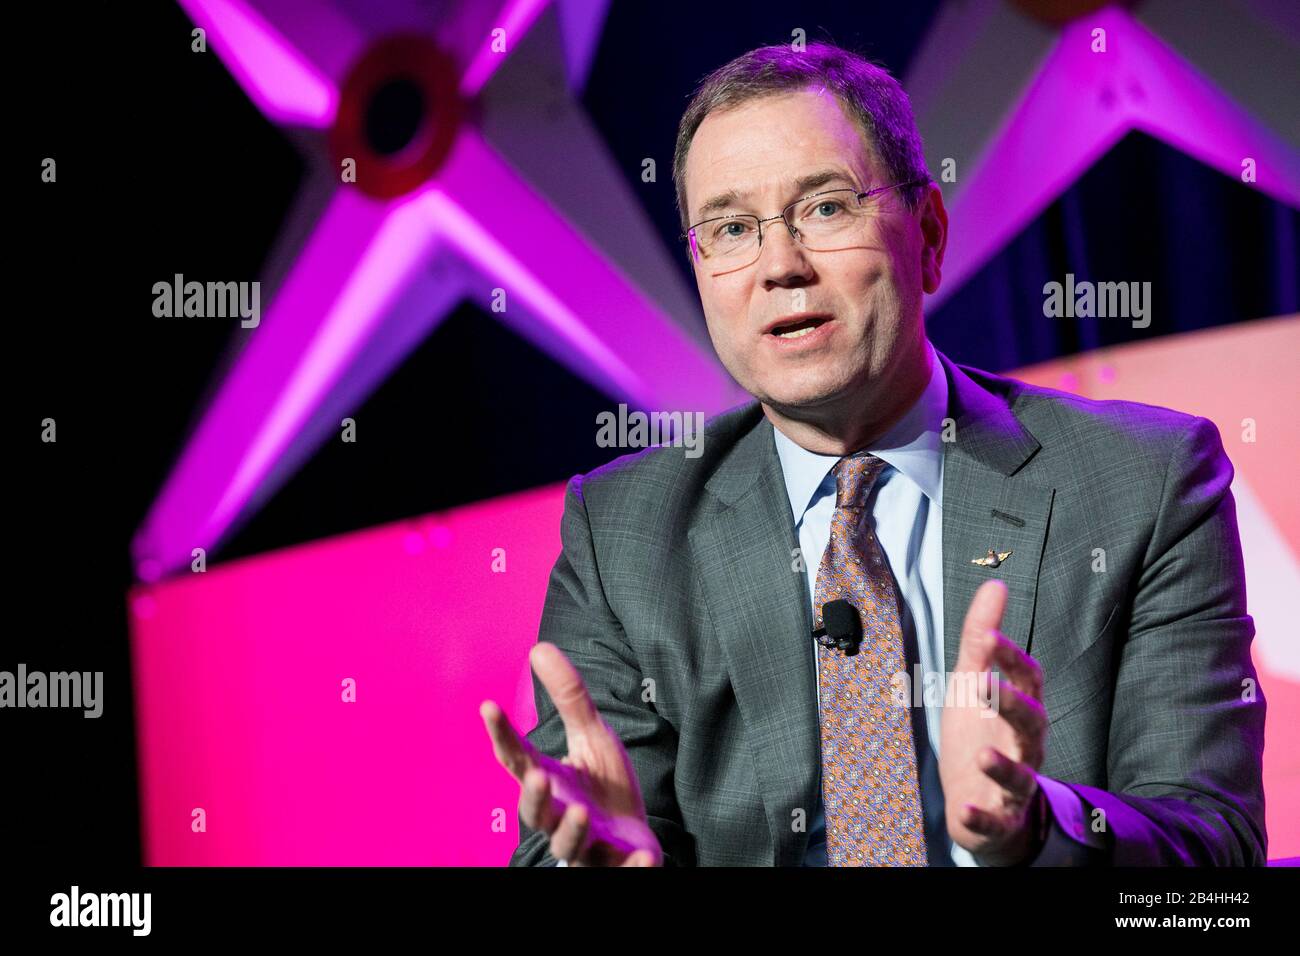 Bradley Tilden, Chairman, President, and Chief Executive Officer, Alaska Air Group, Inc., speaks at the U.S. Chamber of Commerce Aviation Summit in Wa Stock Photo